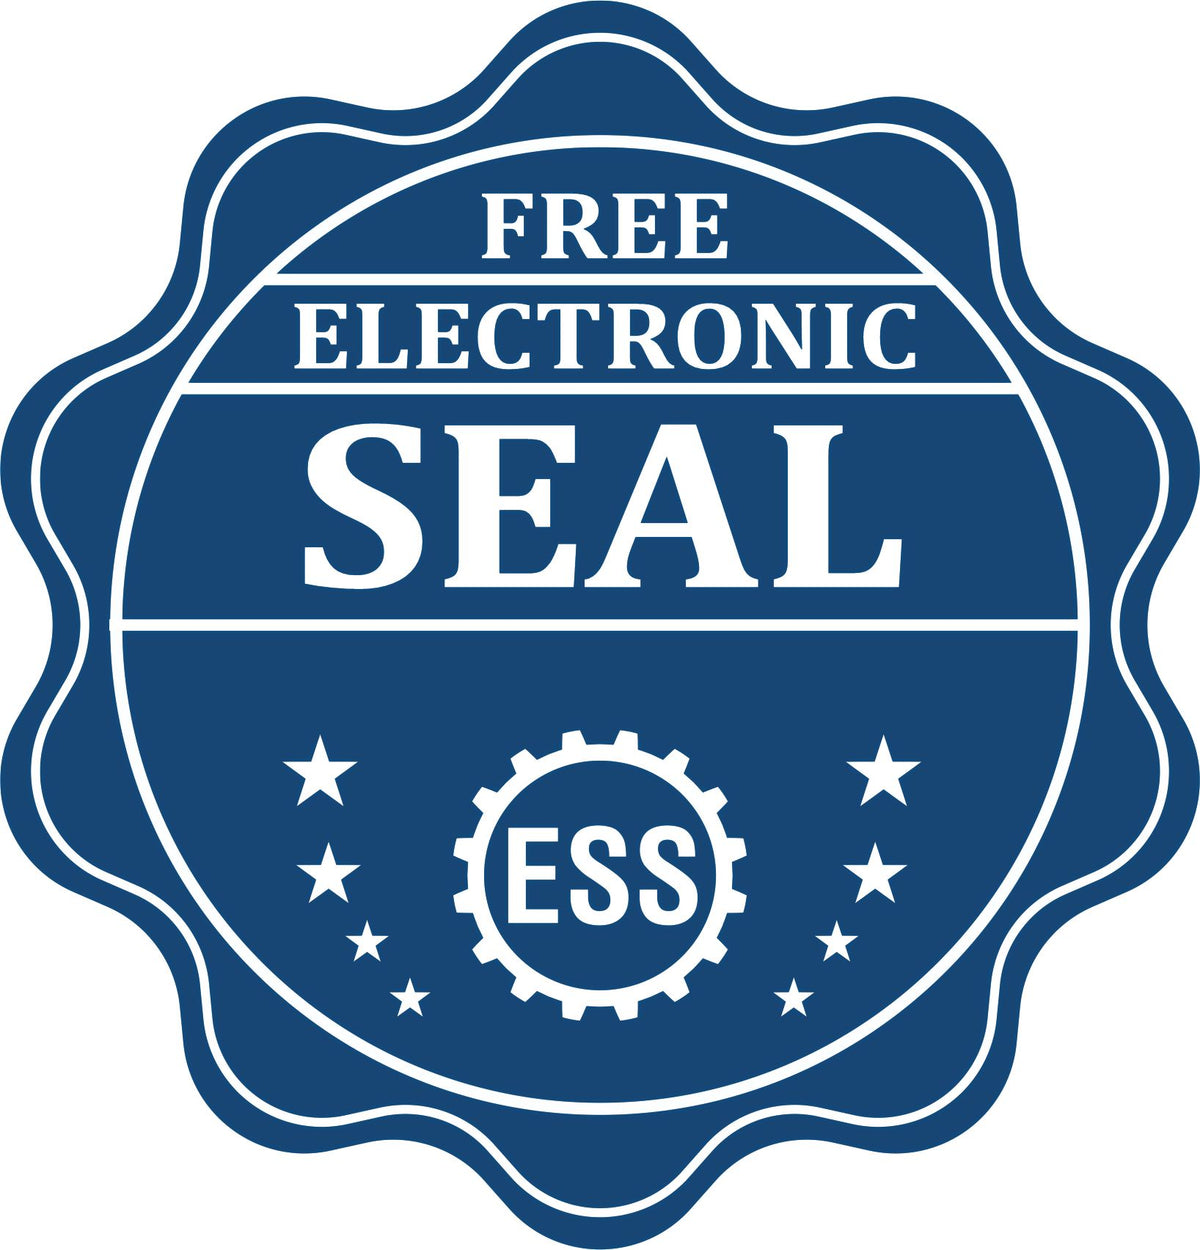 A badge showing a free electronic seal for the Super Slim Nebraska Notary Public Stamp with stars and the ESS gear on the emblem.